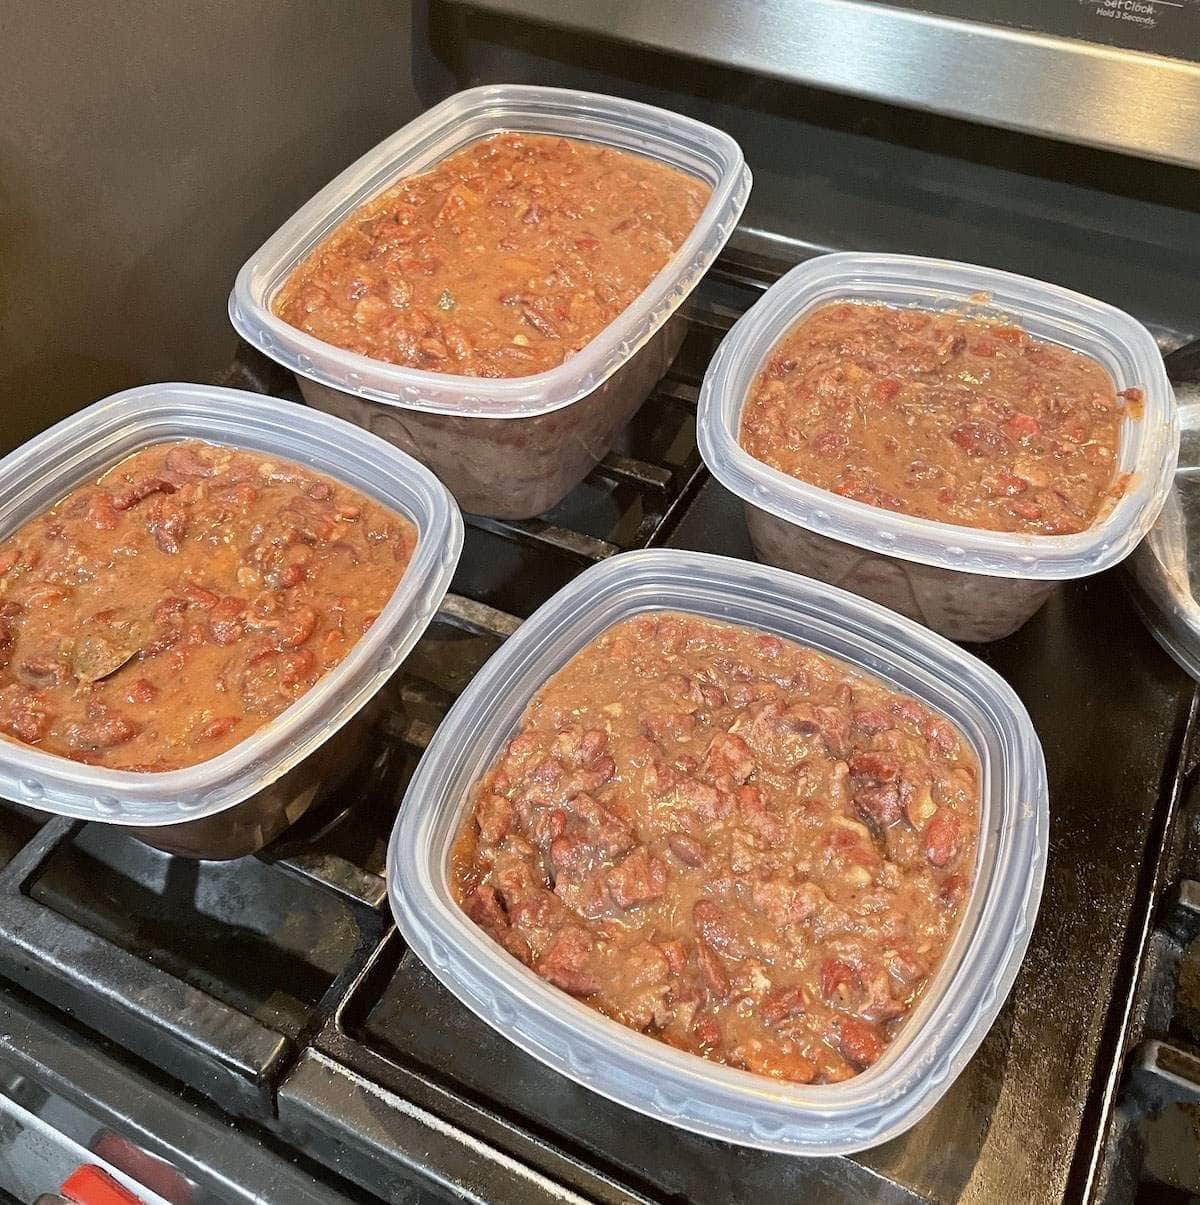 Cooked red beans and rice in plastic containers, cooling on a stovetop.